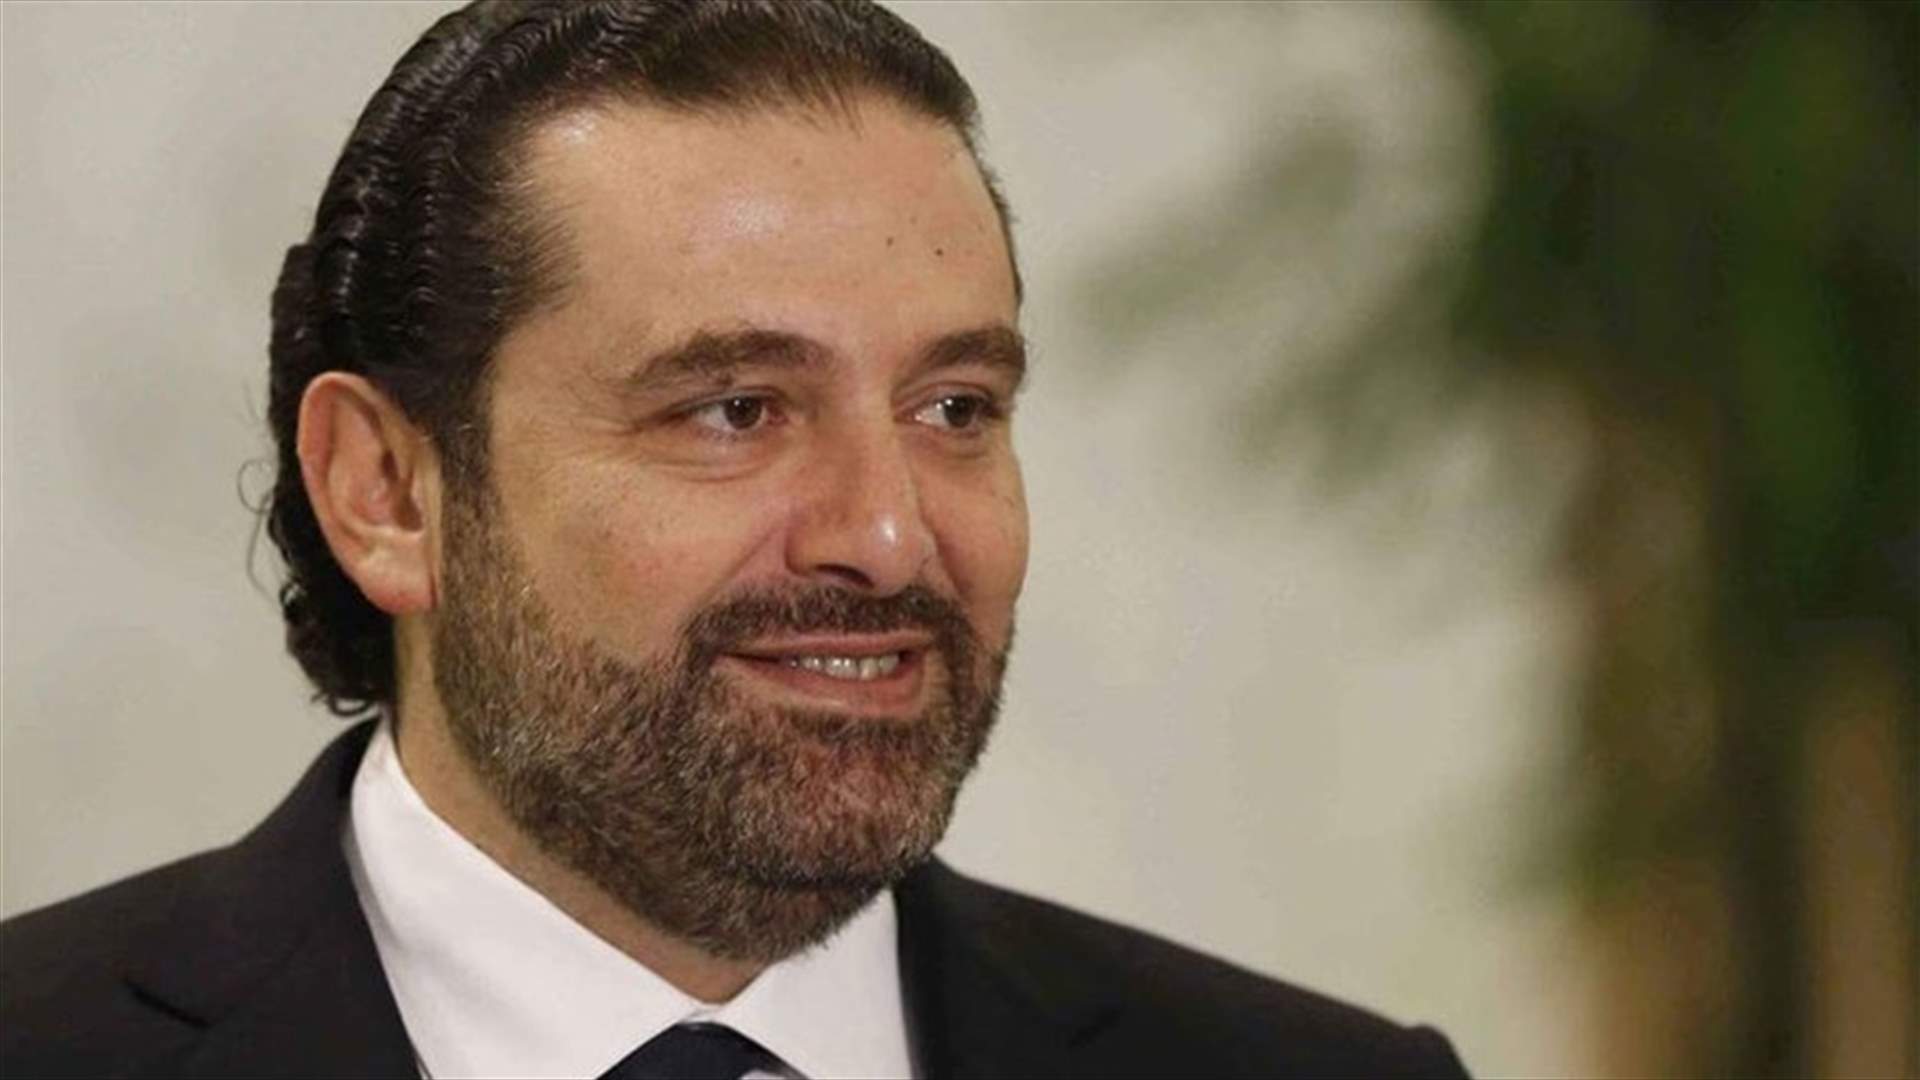 PM Hariri says Lebanon cannot bear the burden of the Palestinian refugees